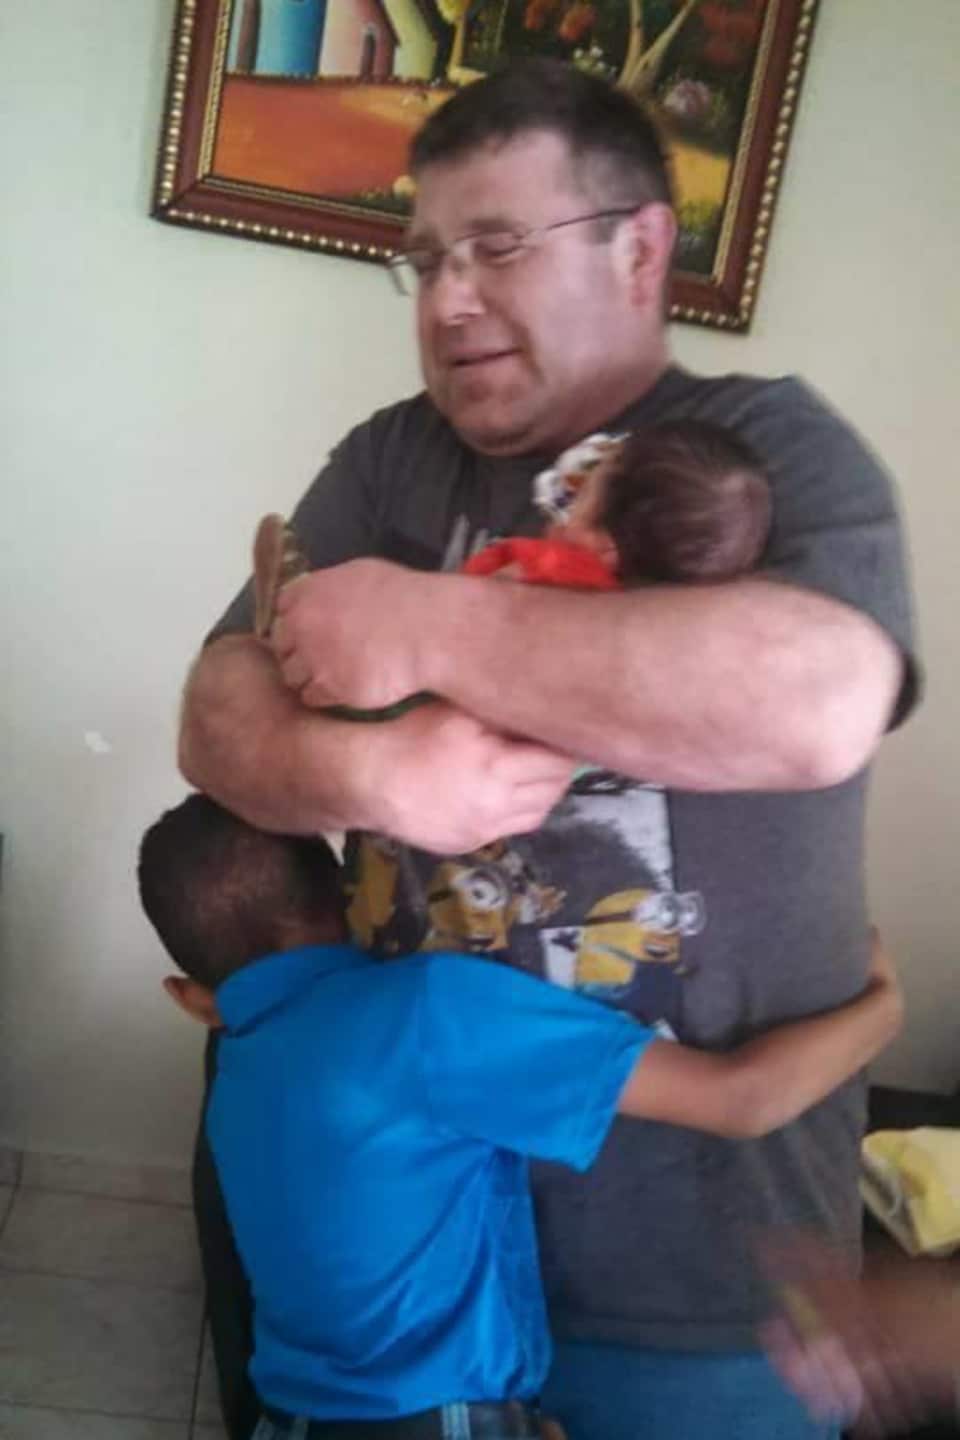 Danny held a young baby in his arms as a boy hugged him.